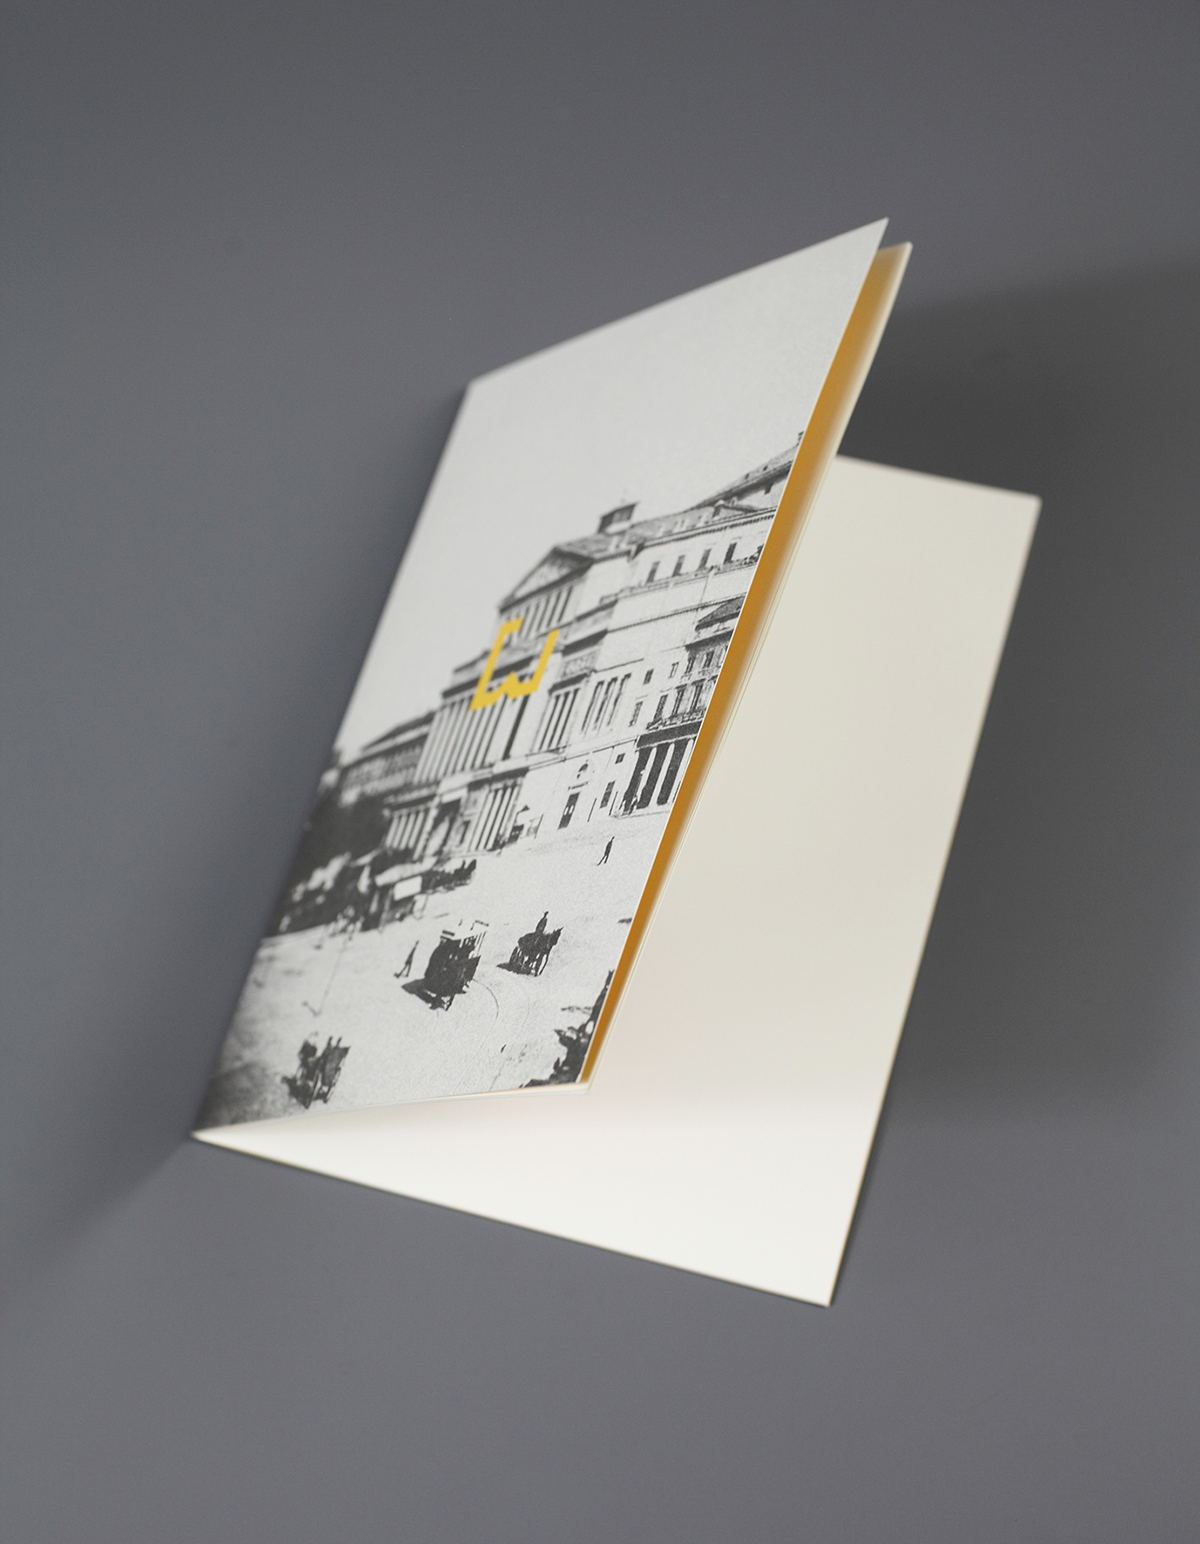 conference warsaw poland museum theathre science lectures yellow paper photos visual identity grey